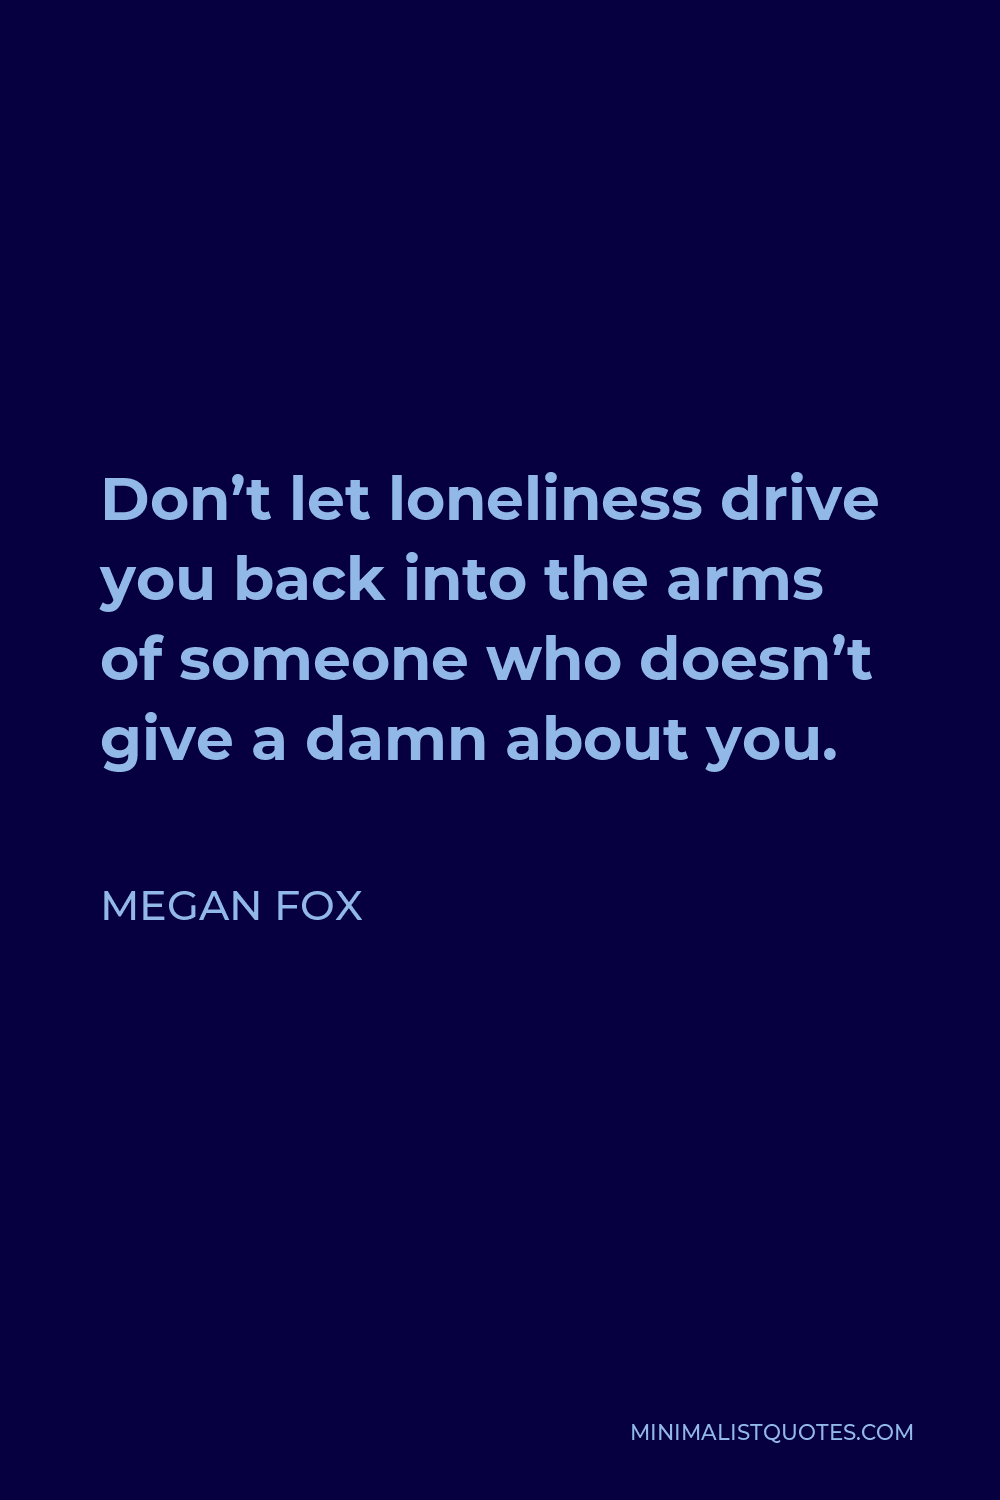 Megan Fox Quote - Don’t let loneliness drive you back into the arms of someone who doesn’t give a damn about you.